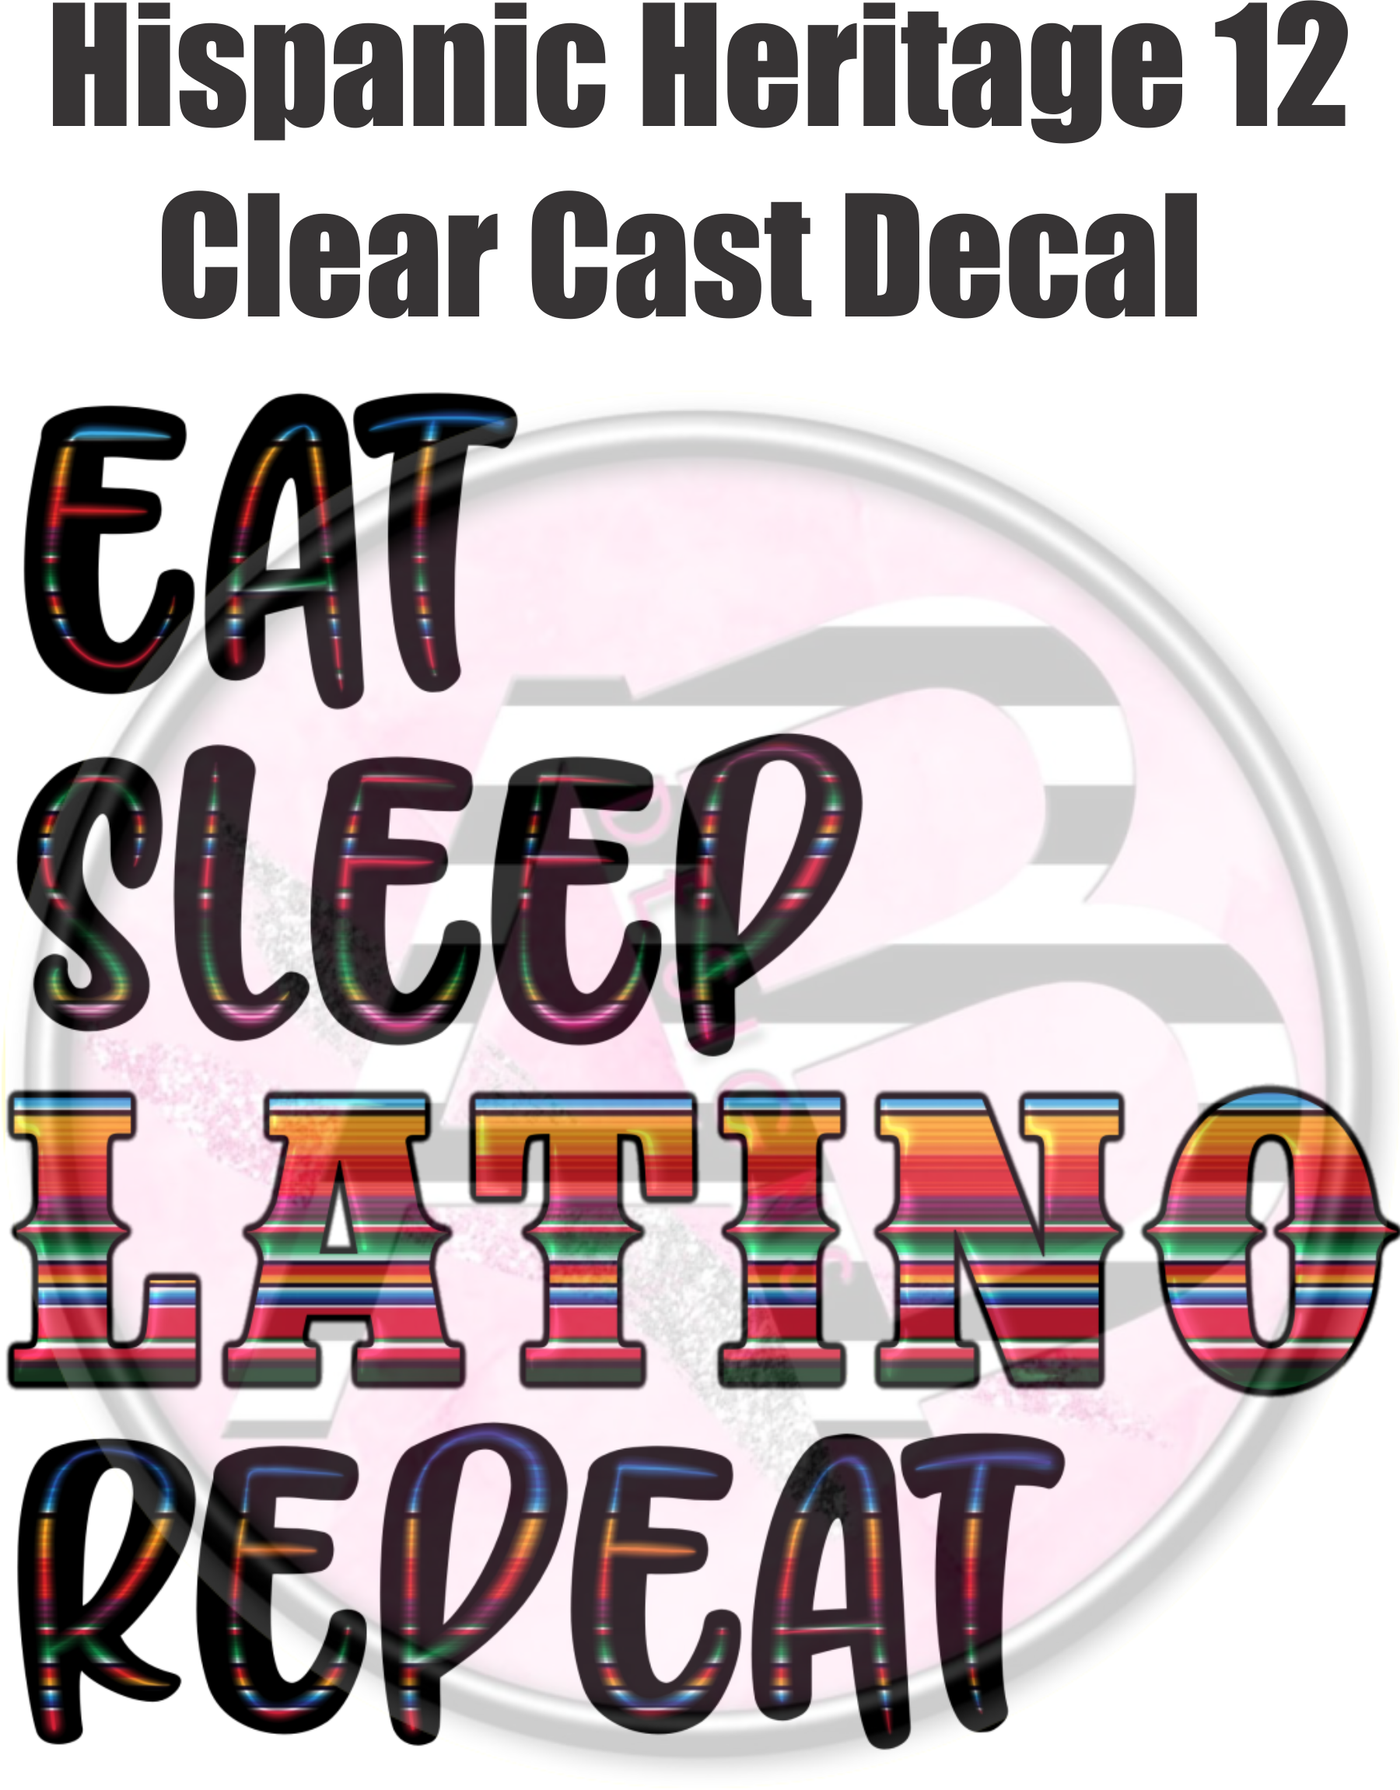 Hispanic Heritage 12 - Clear Cast Decal